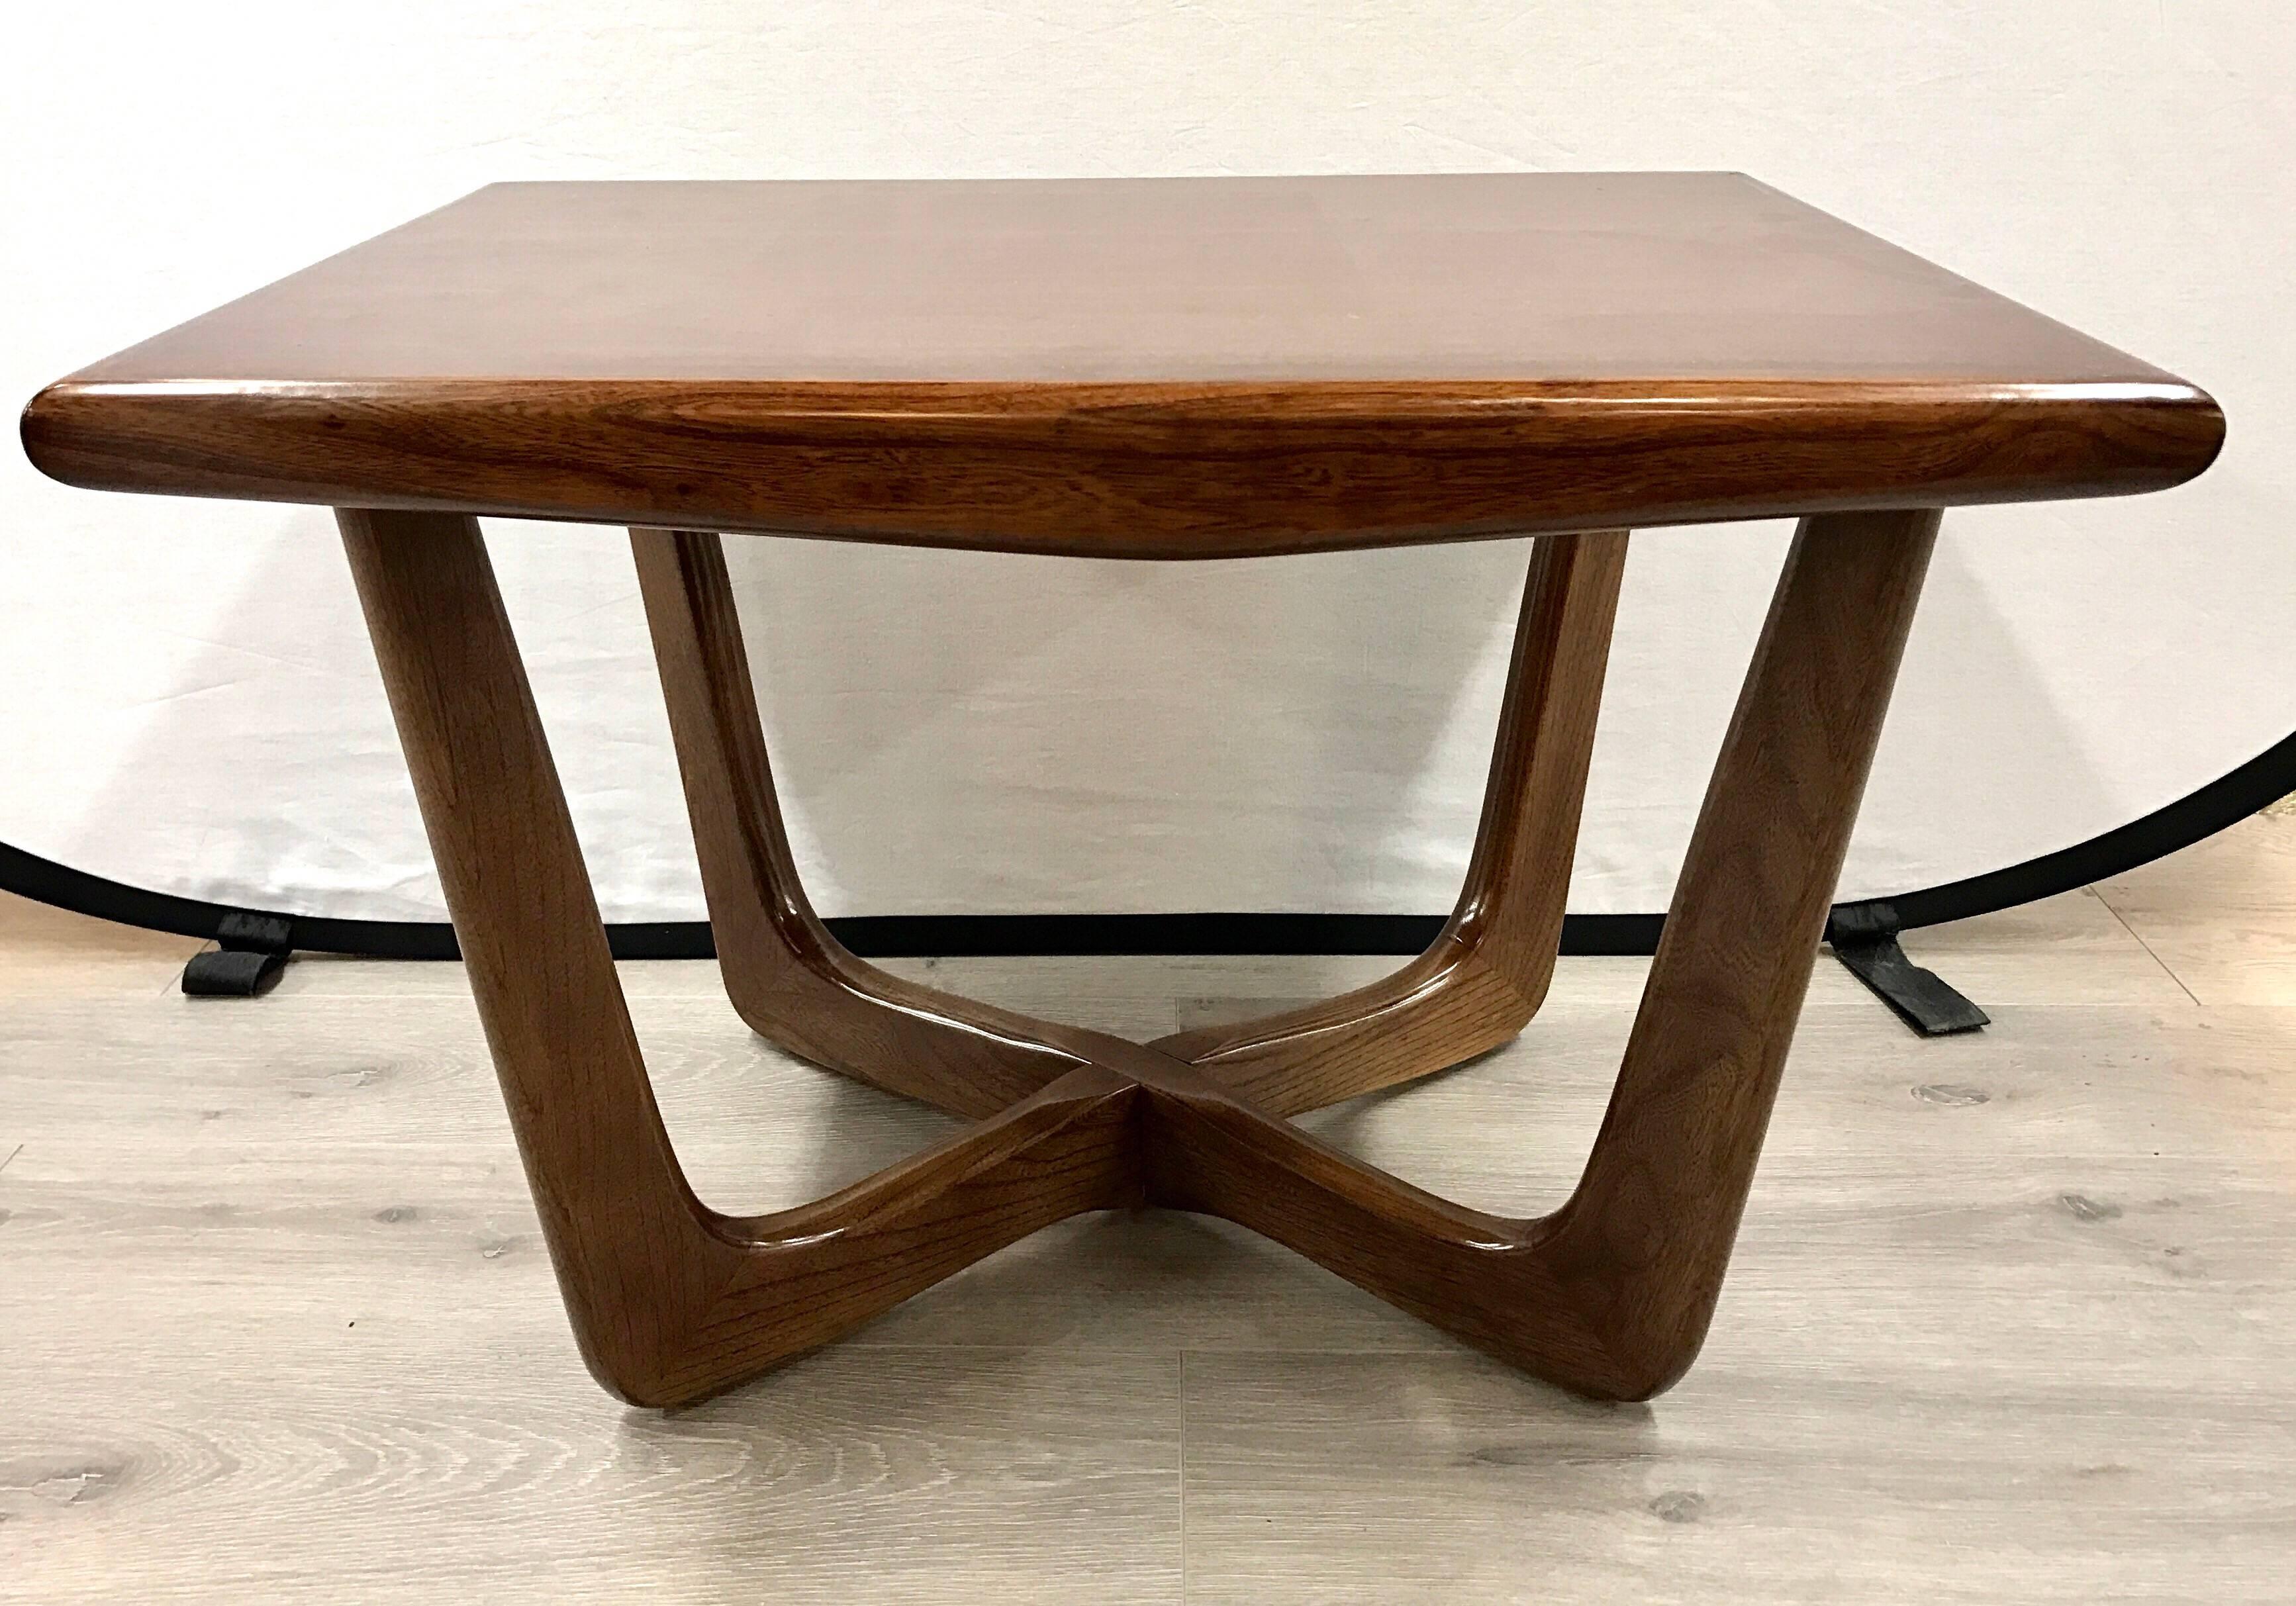 Pair of matching Pearsall style midcentury dark teak end tables with an X-base.